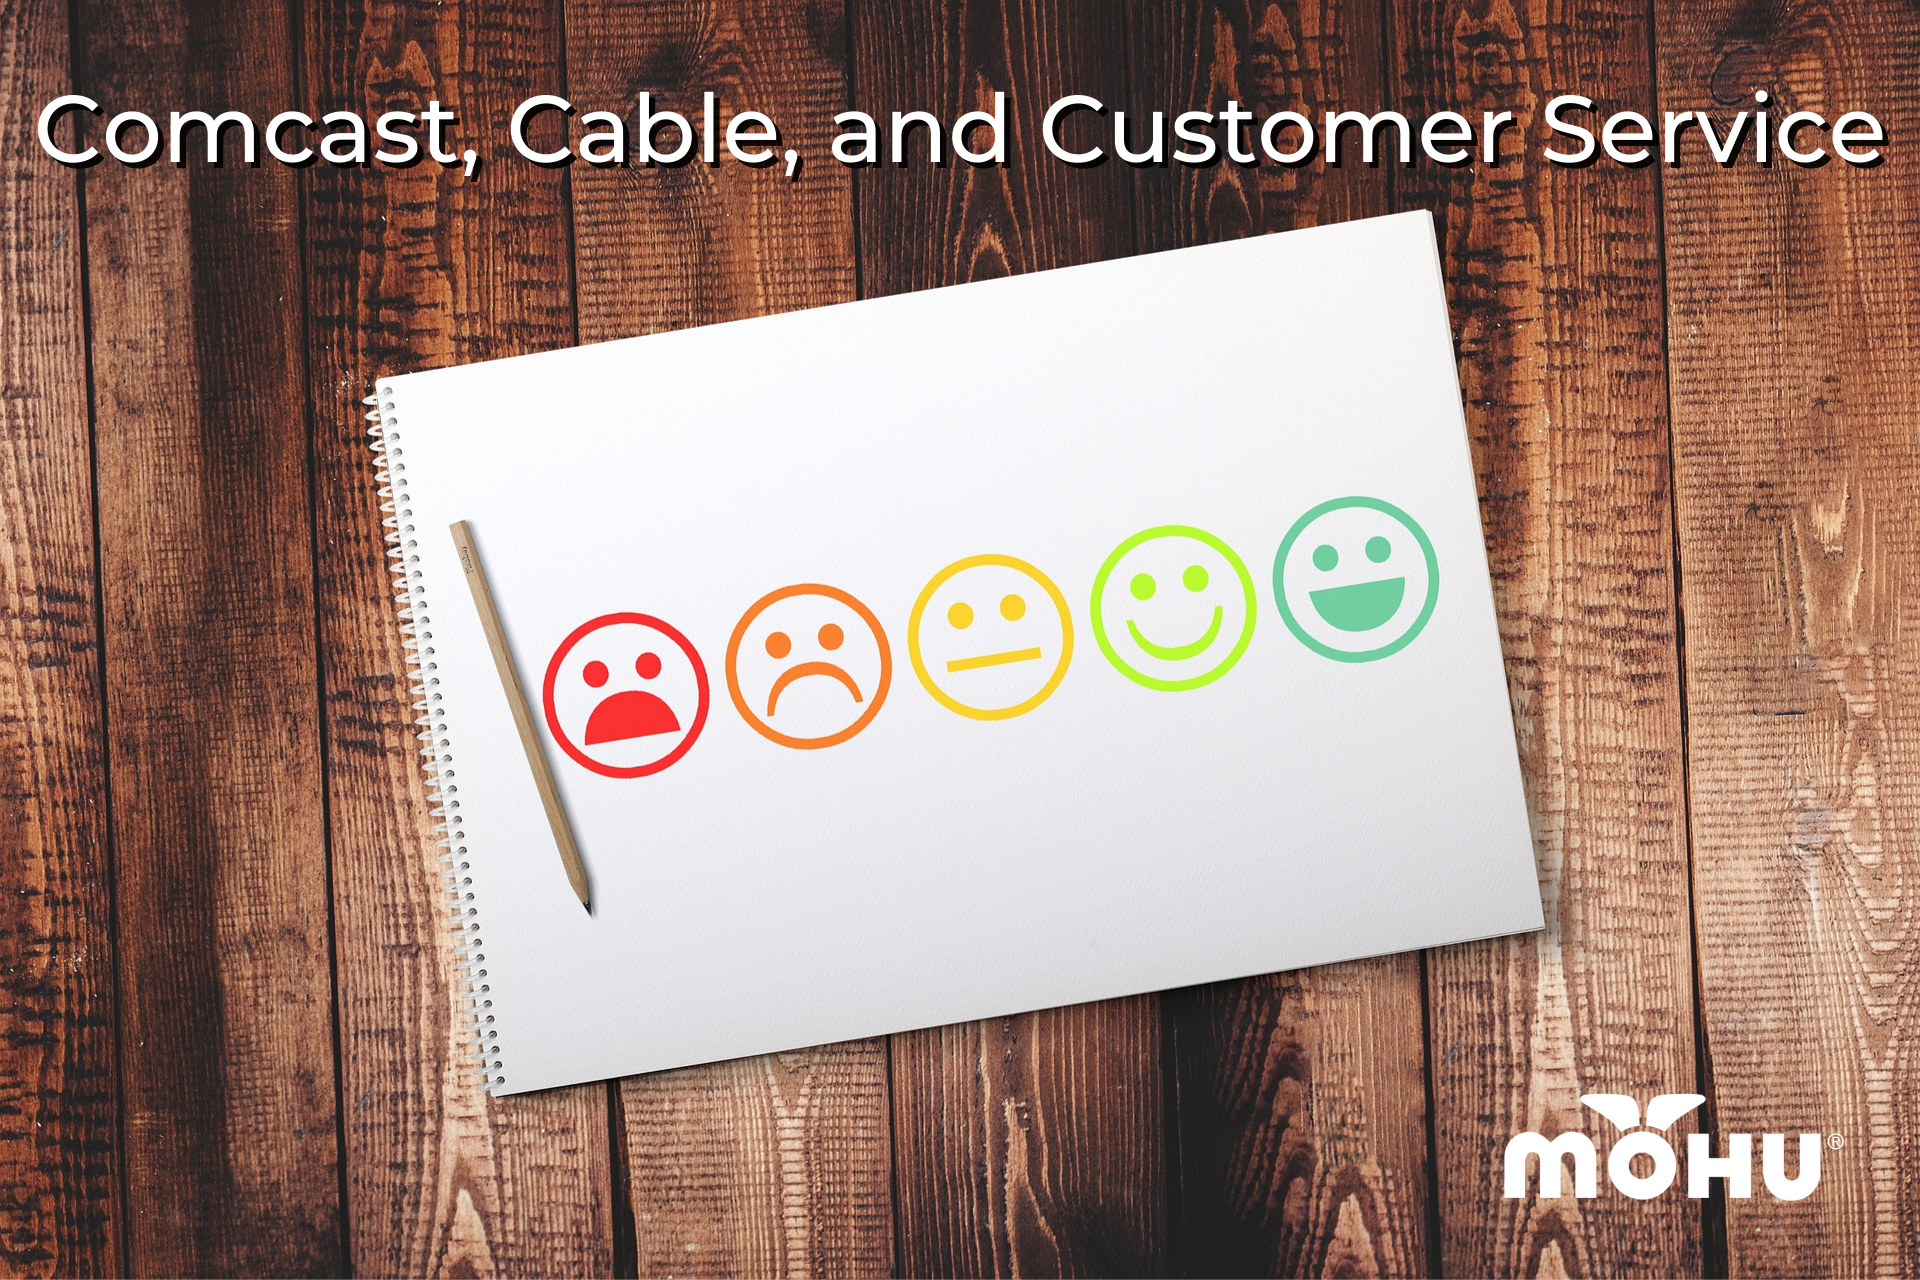 smiley faces ranging from sad to happy, Comcast, Cable, and Customer Service, Mohu